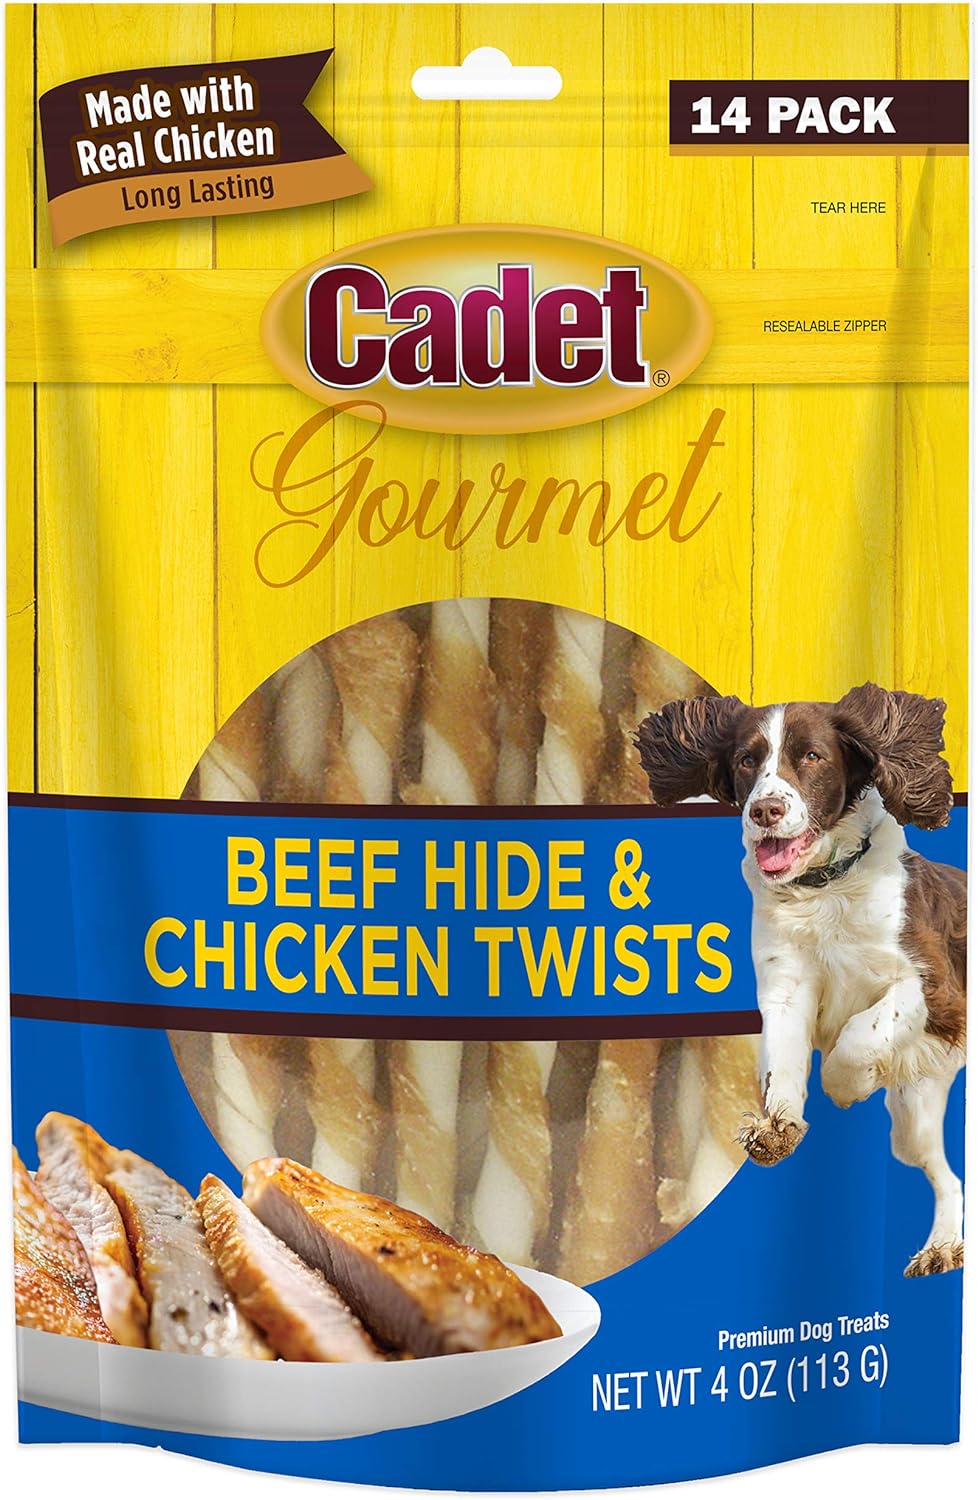 Cadet Gourmet Beef Hide & Chicken Twists Dog Treats - Healthy & Natural Rawhide & Chicken Dog Treats for Small & Large Dogs - Inspected & Tested in USA, 5 In. (14 Count)